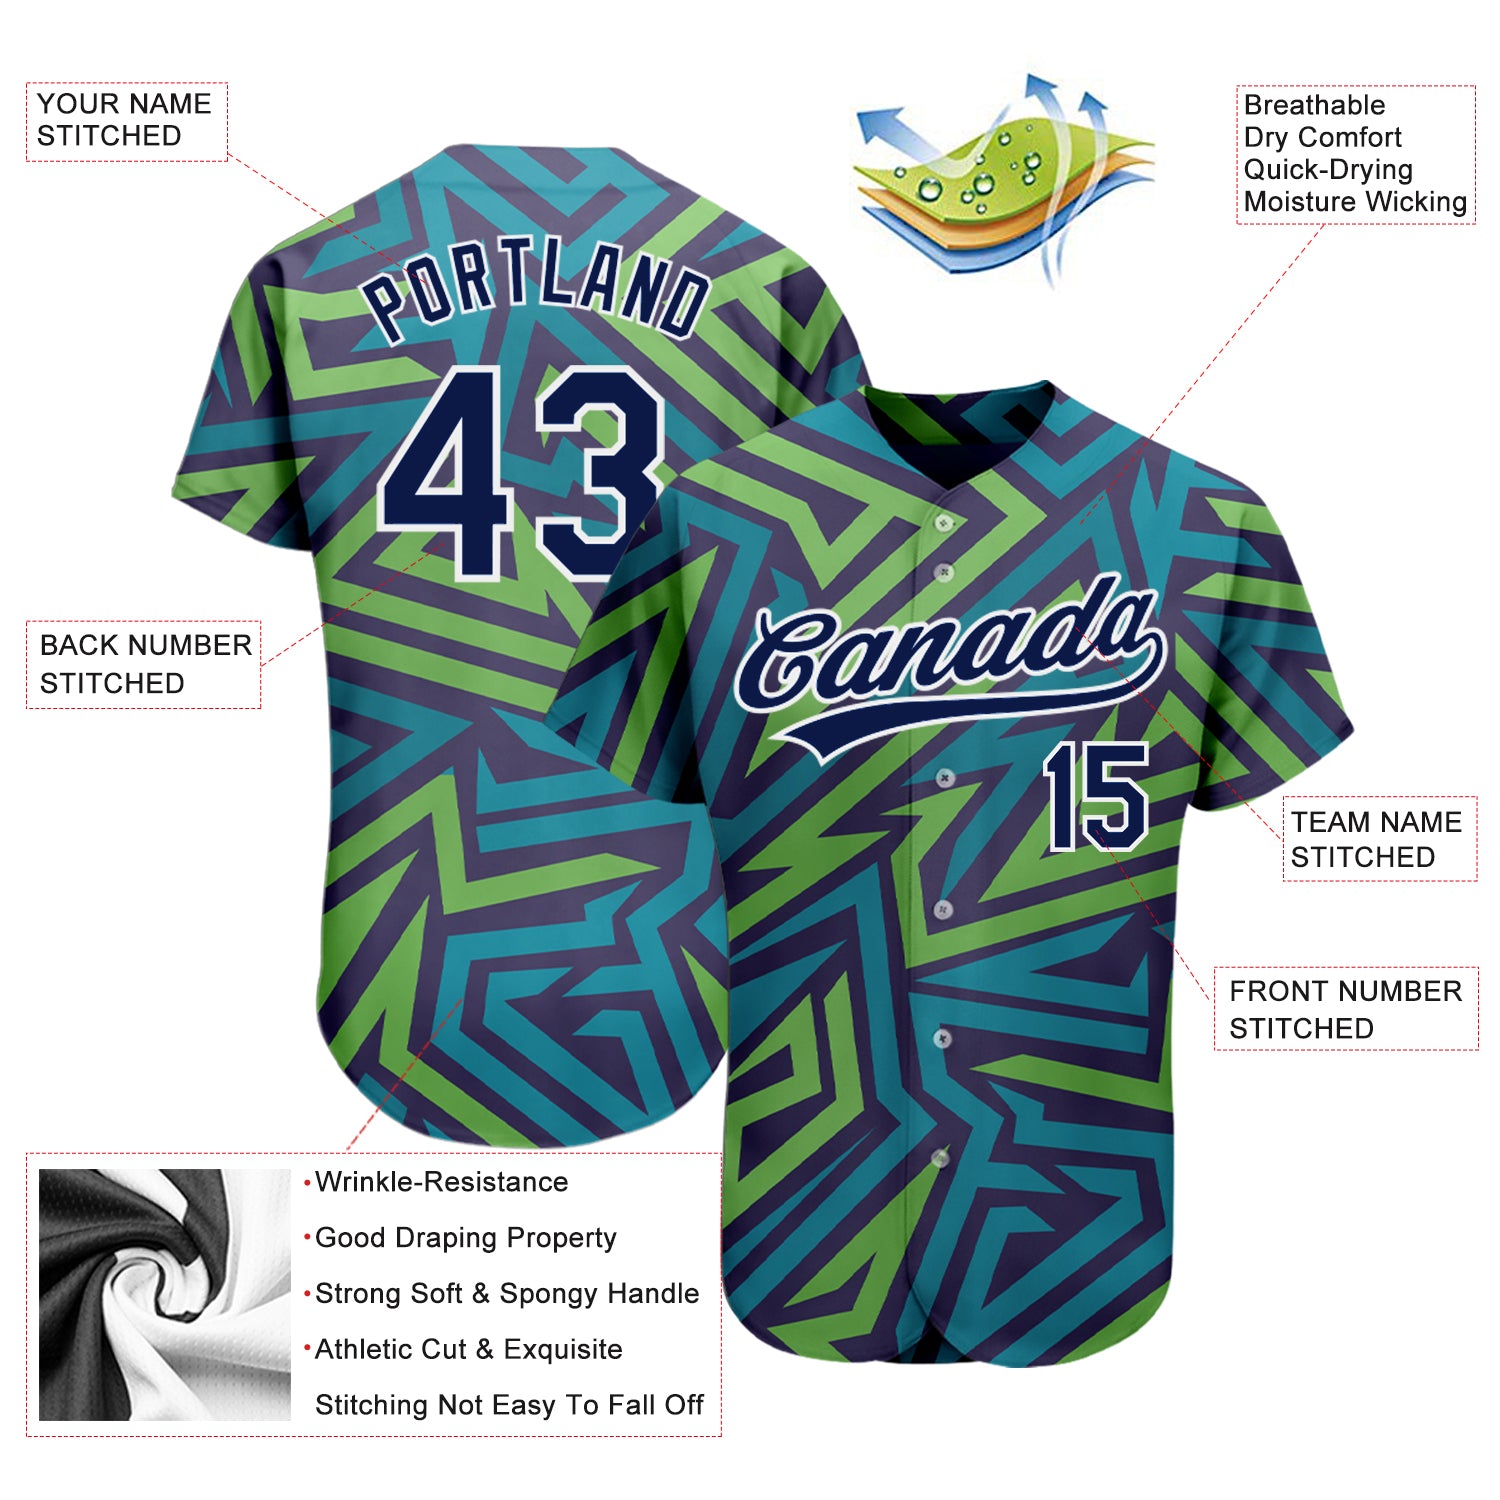 Seattle Mariners Steal Your Base Tie-Dye T-Shirt